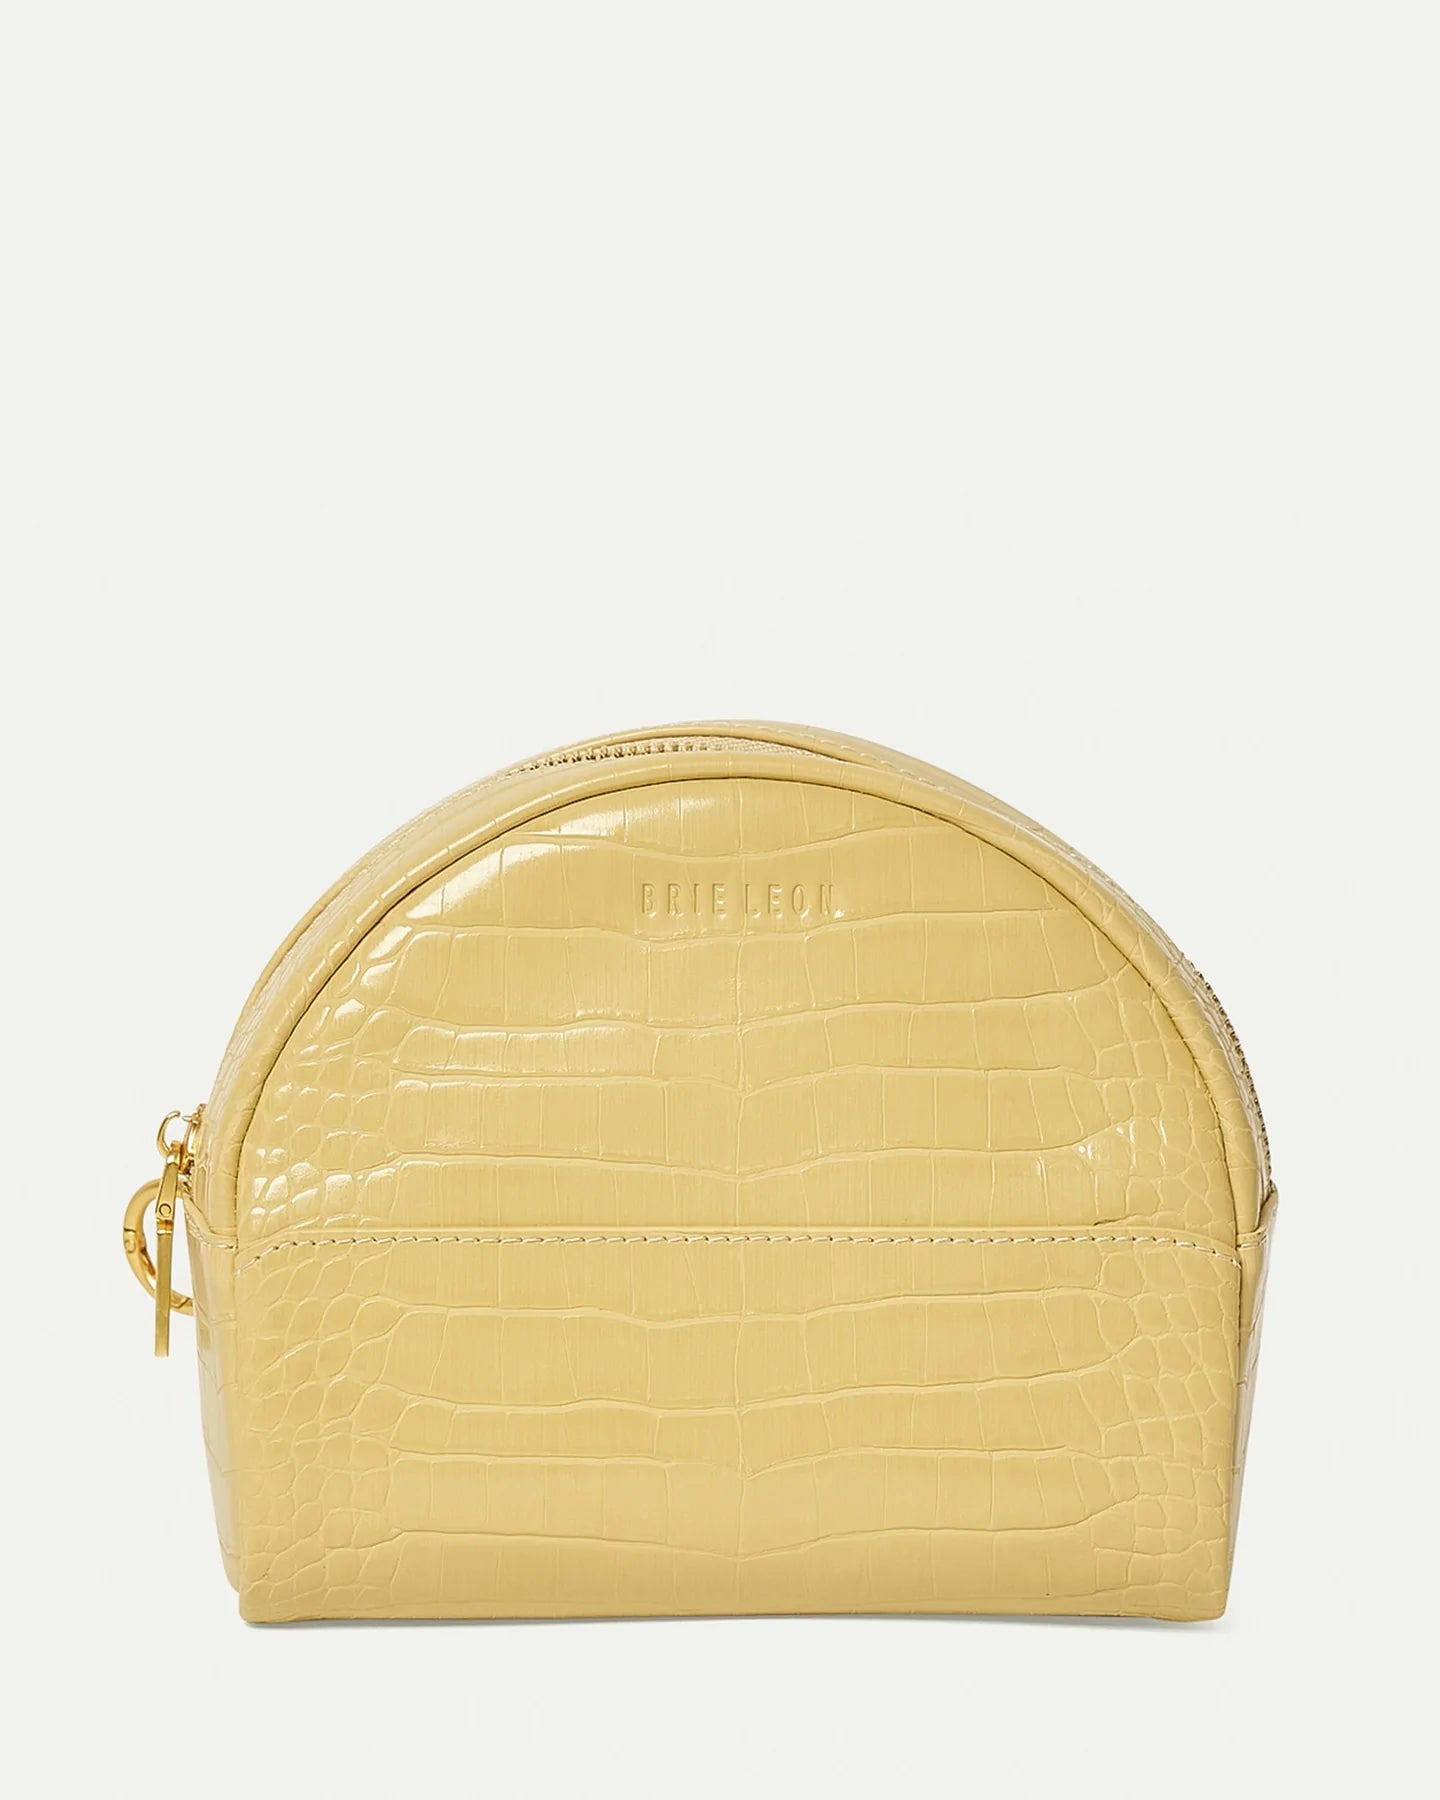 BRIE LEON // Circulo Essentials Pouch BUTTERMILK BRUSHED RECYCLED CROC